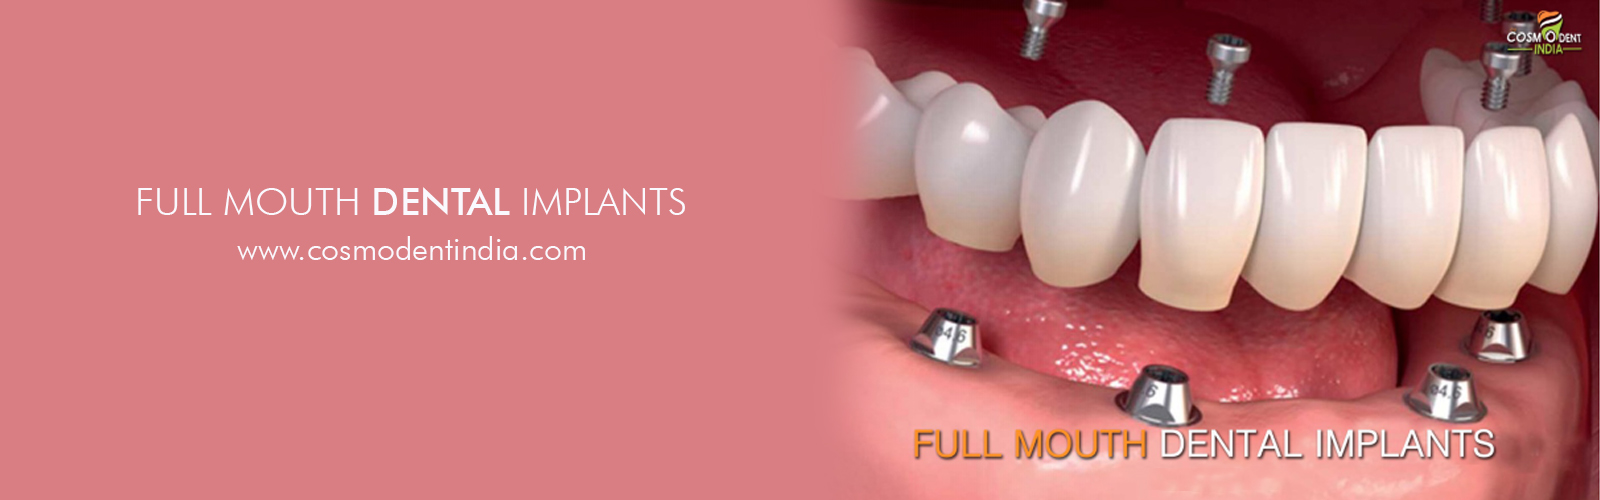 full-mouth-dental-implants-in-india